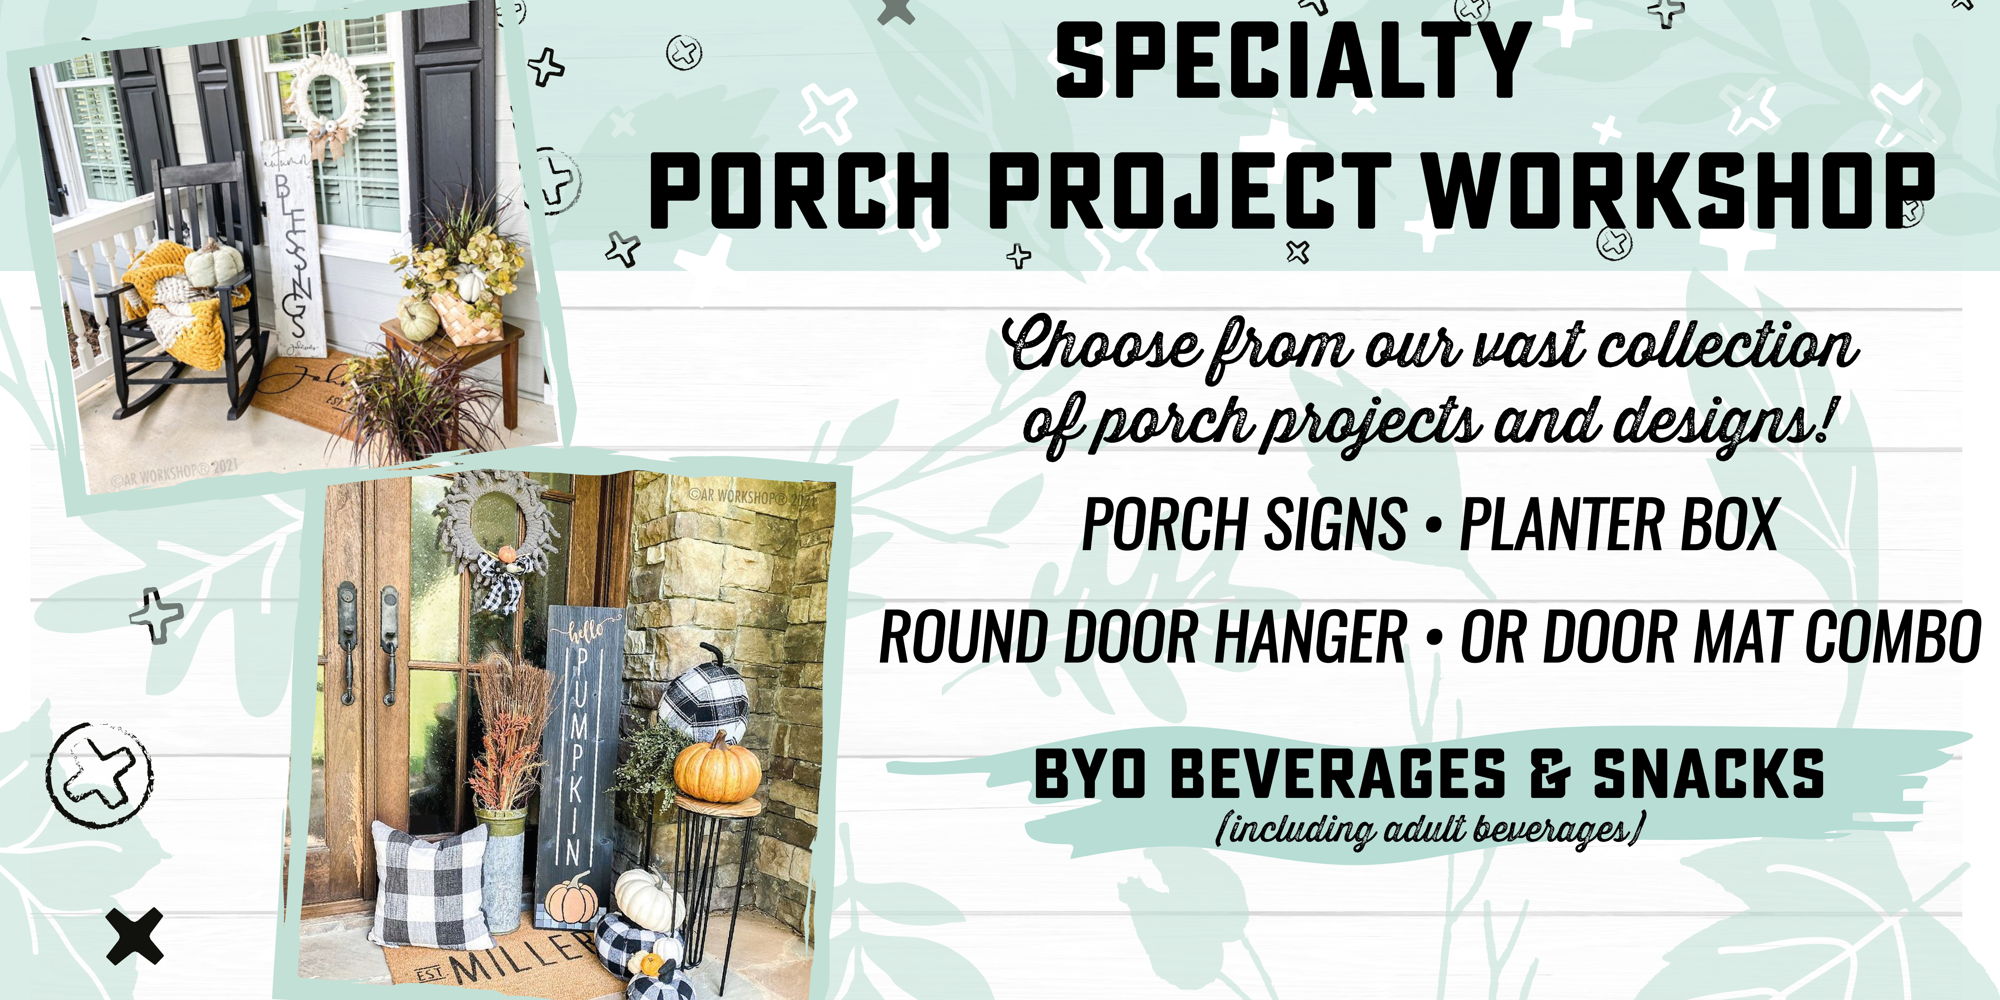 Specialty - Porch Project Workshop promotional image